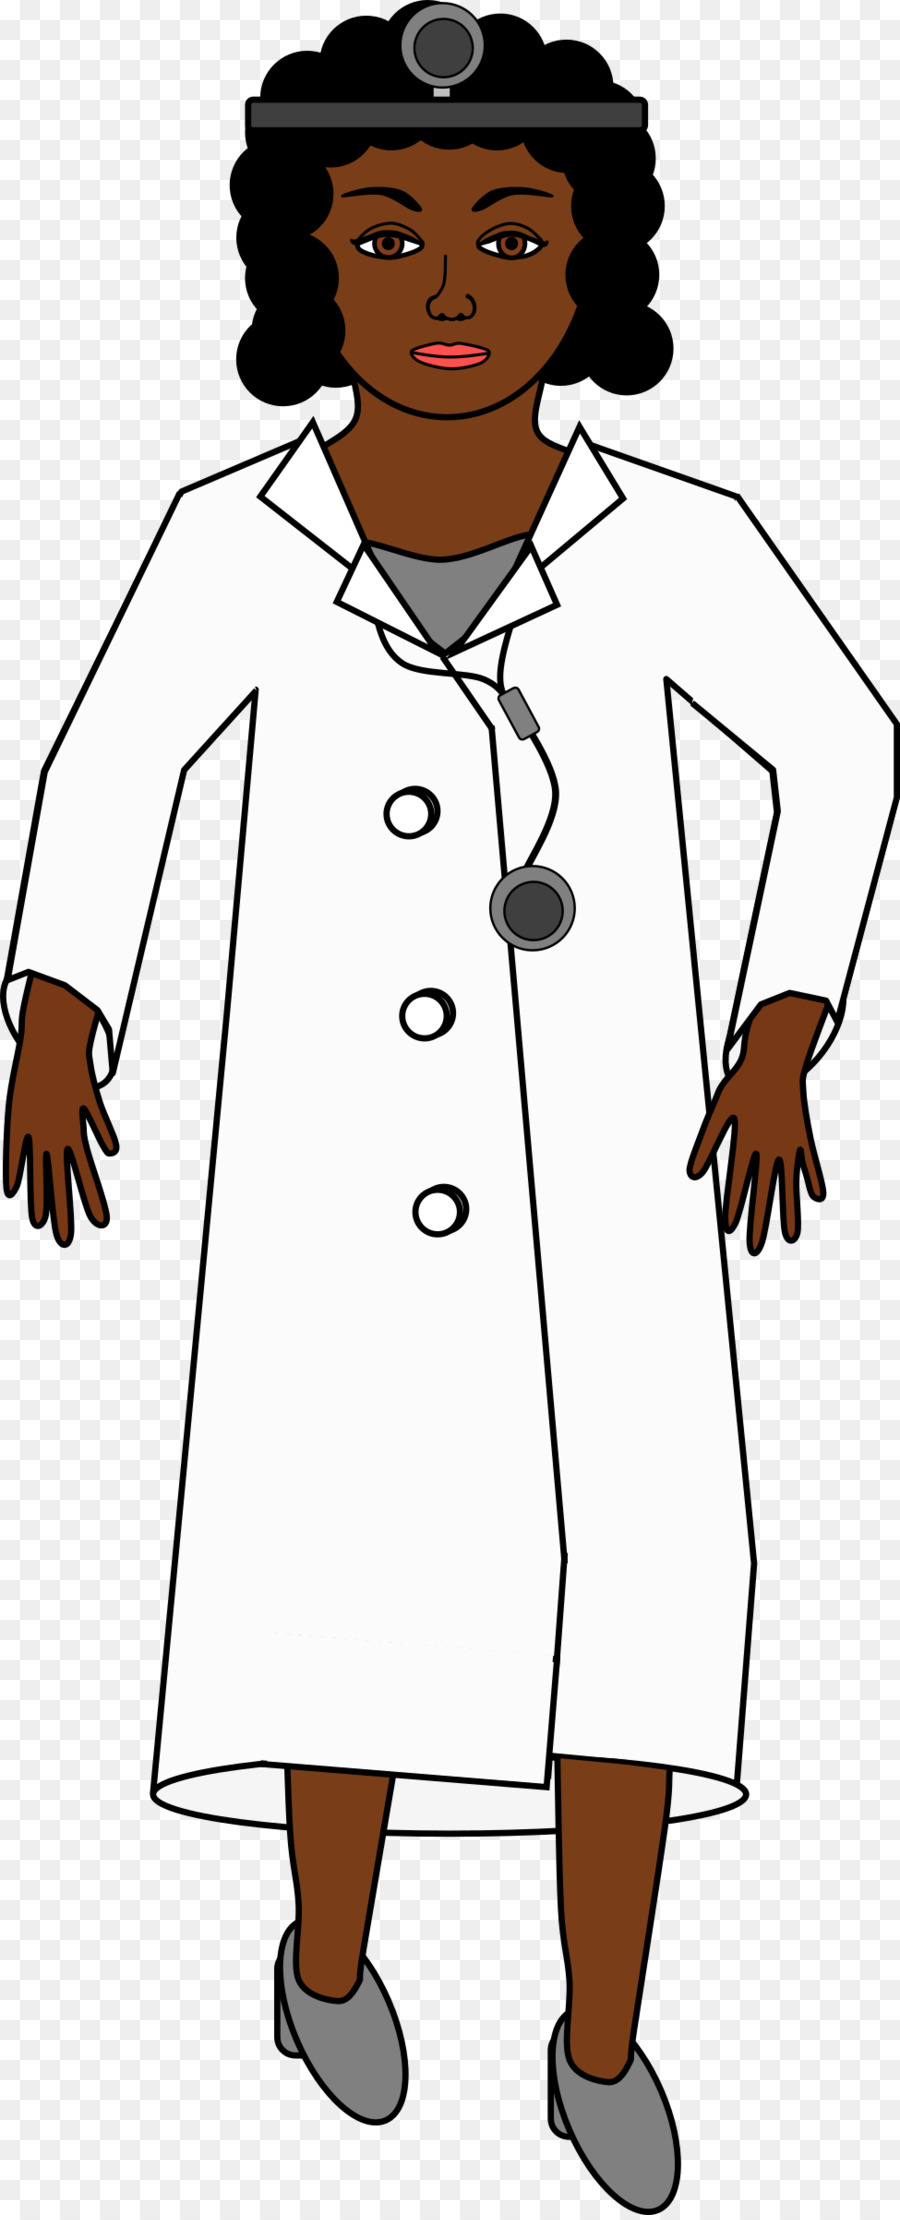 Physician African American Clip art - Transparent Doctor Cliparts png download - 975*2400 - Free Transparent Physician png Download.